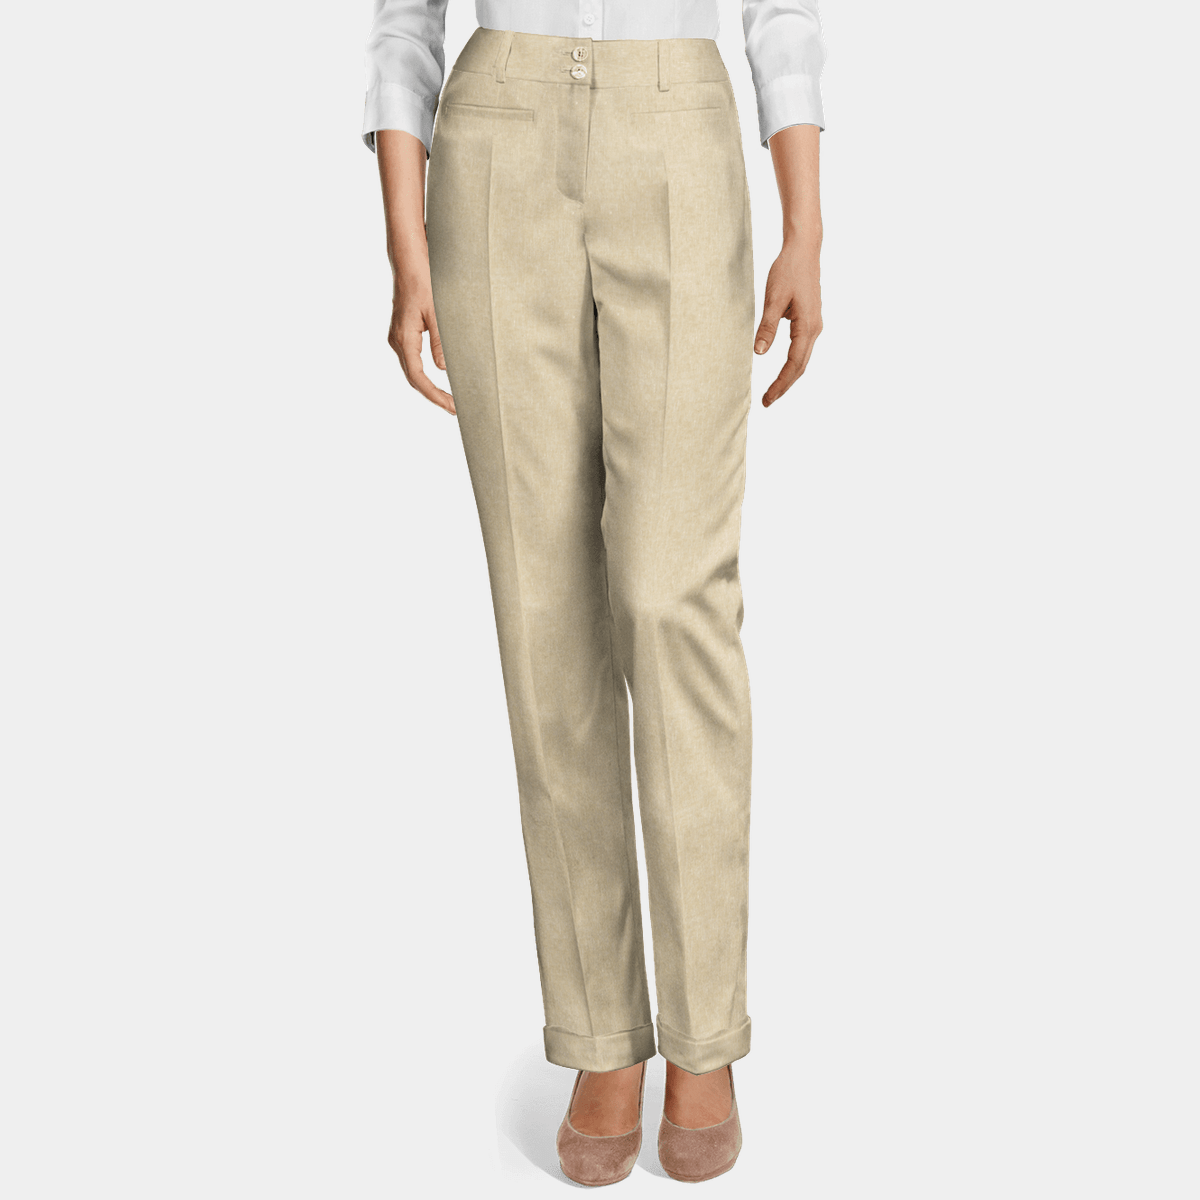 Linen White Shirt with Beige Trousers